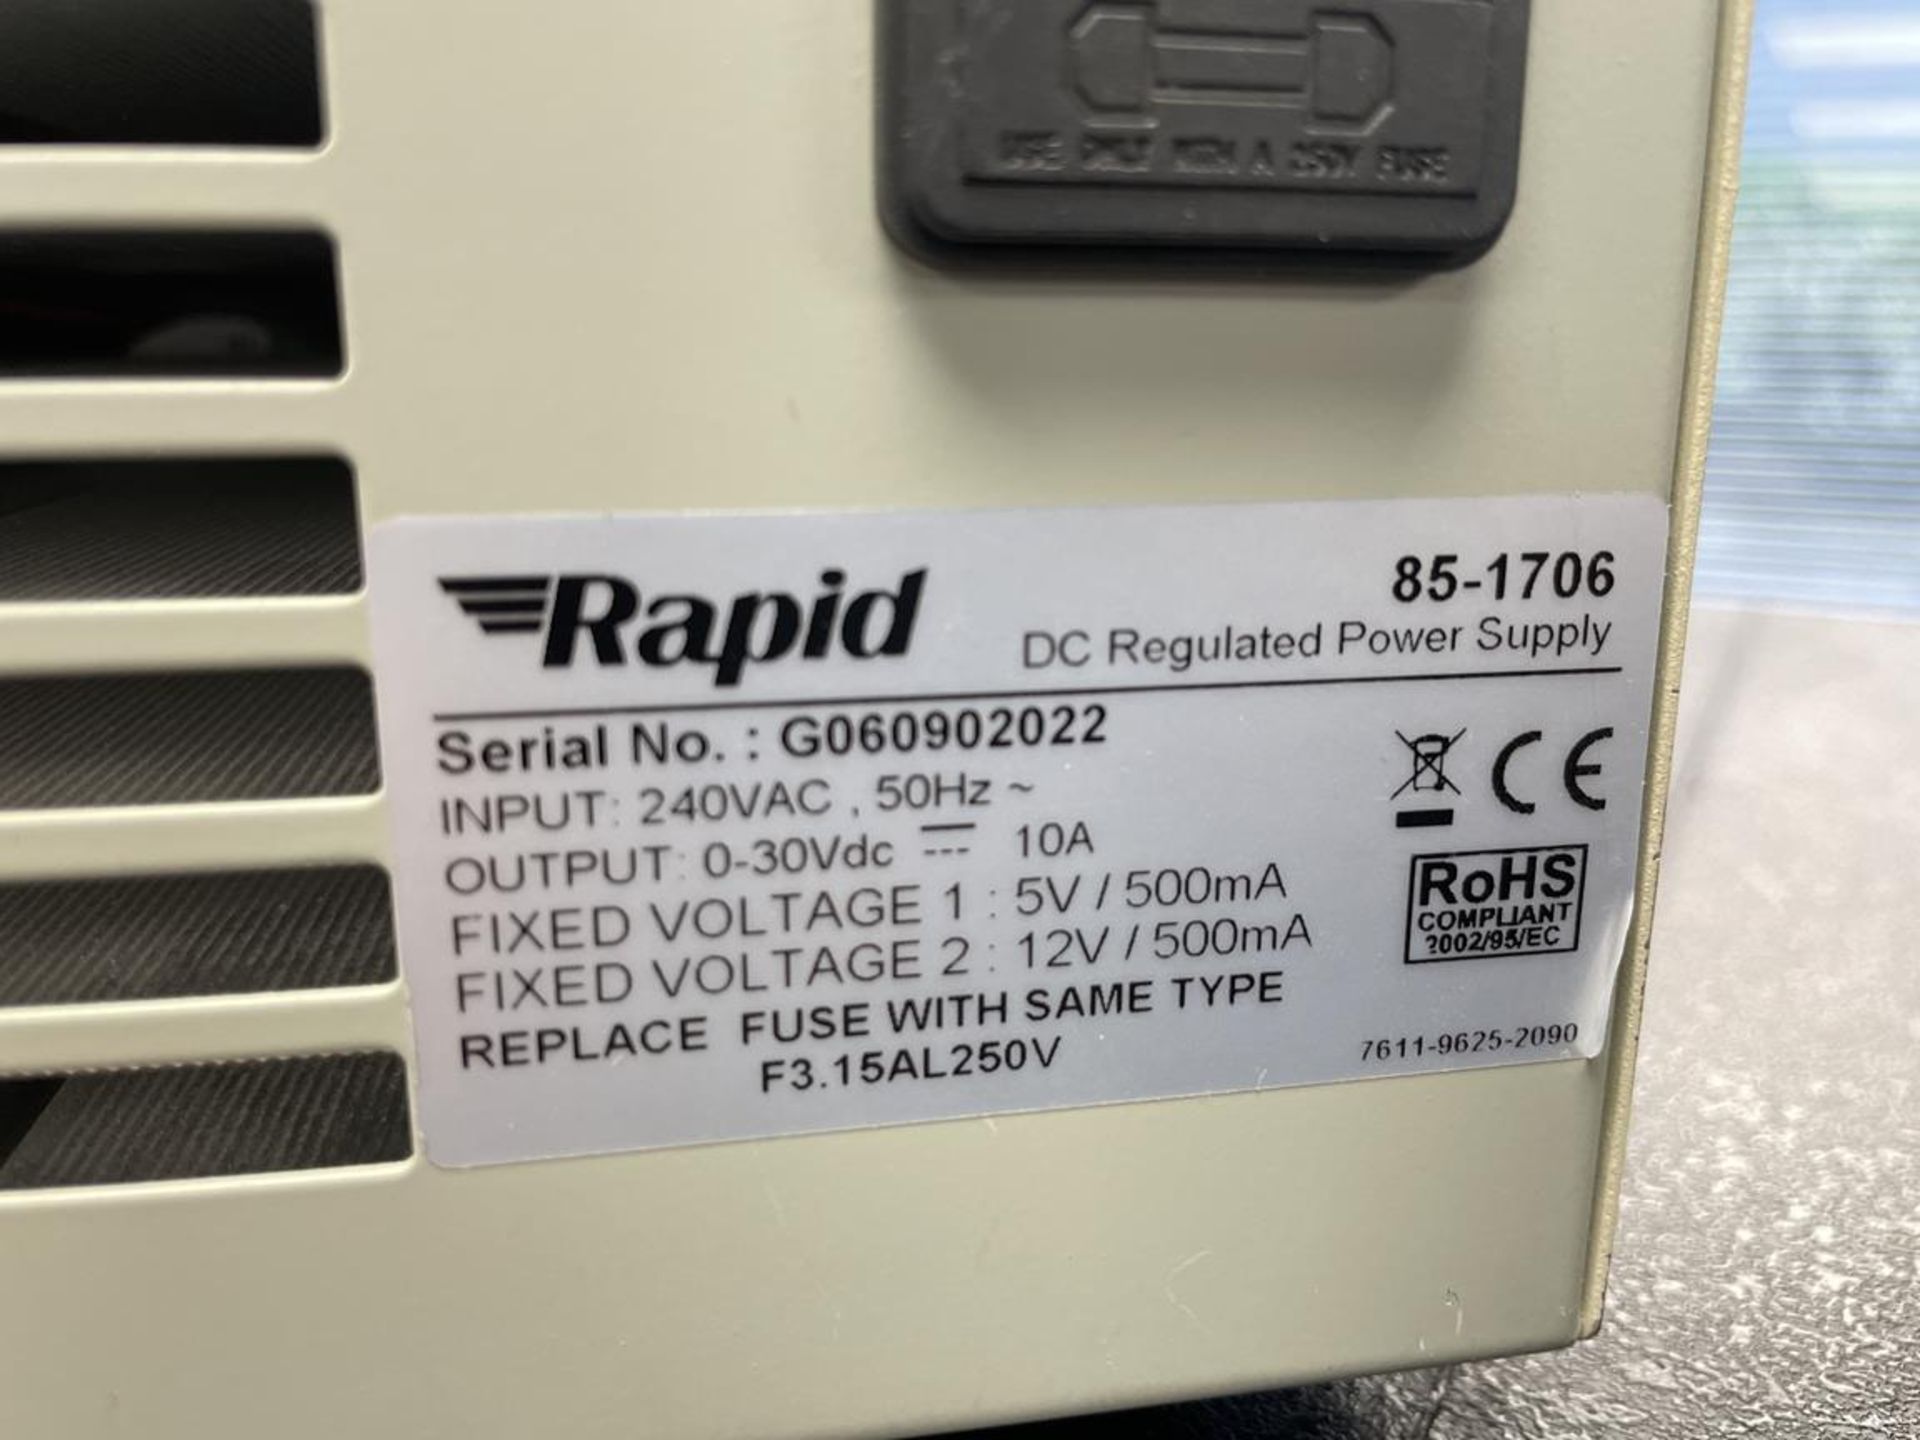 Rapid 85-1706 DC Regulated Power Display - 500mA Max S/No. G060902022 (GB REF#26) - Image 2 of 2